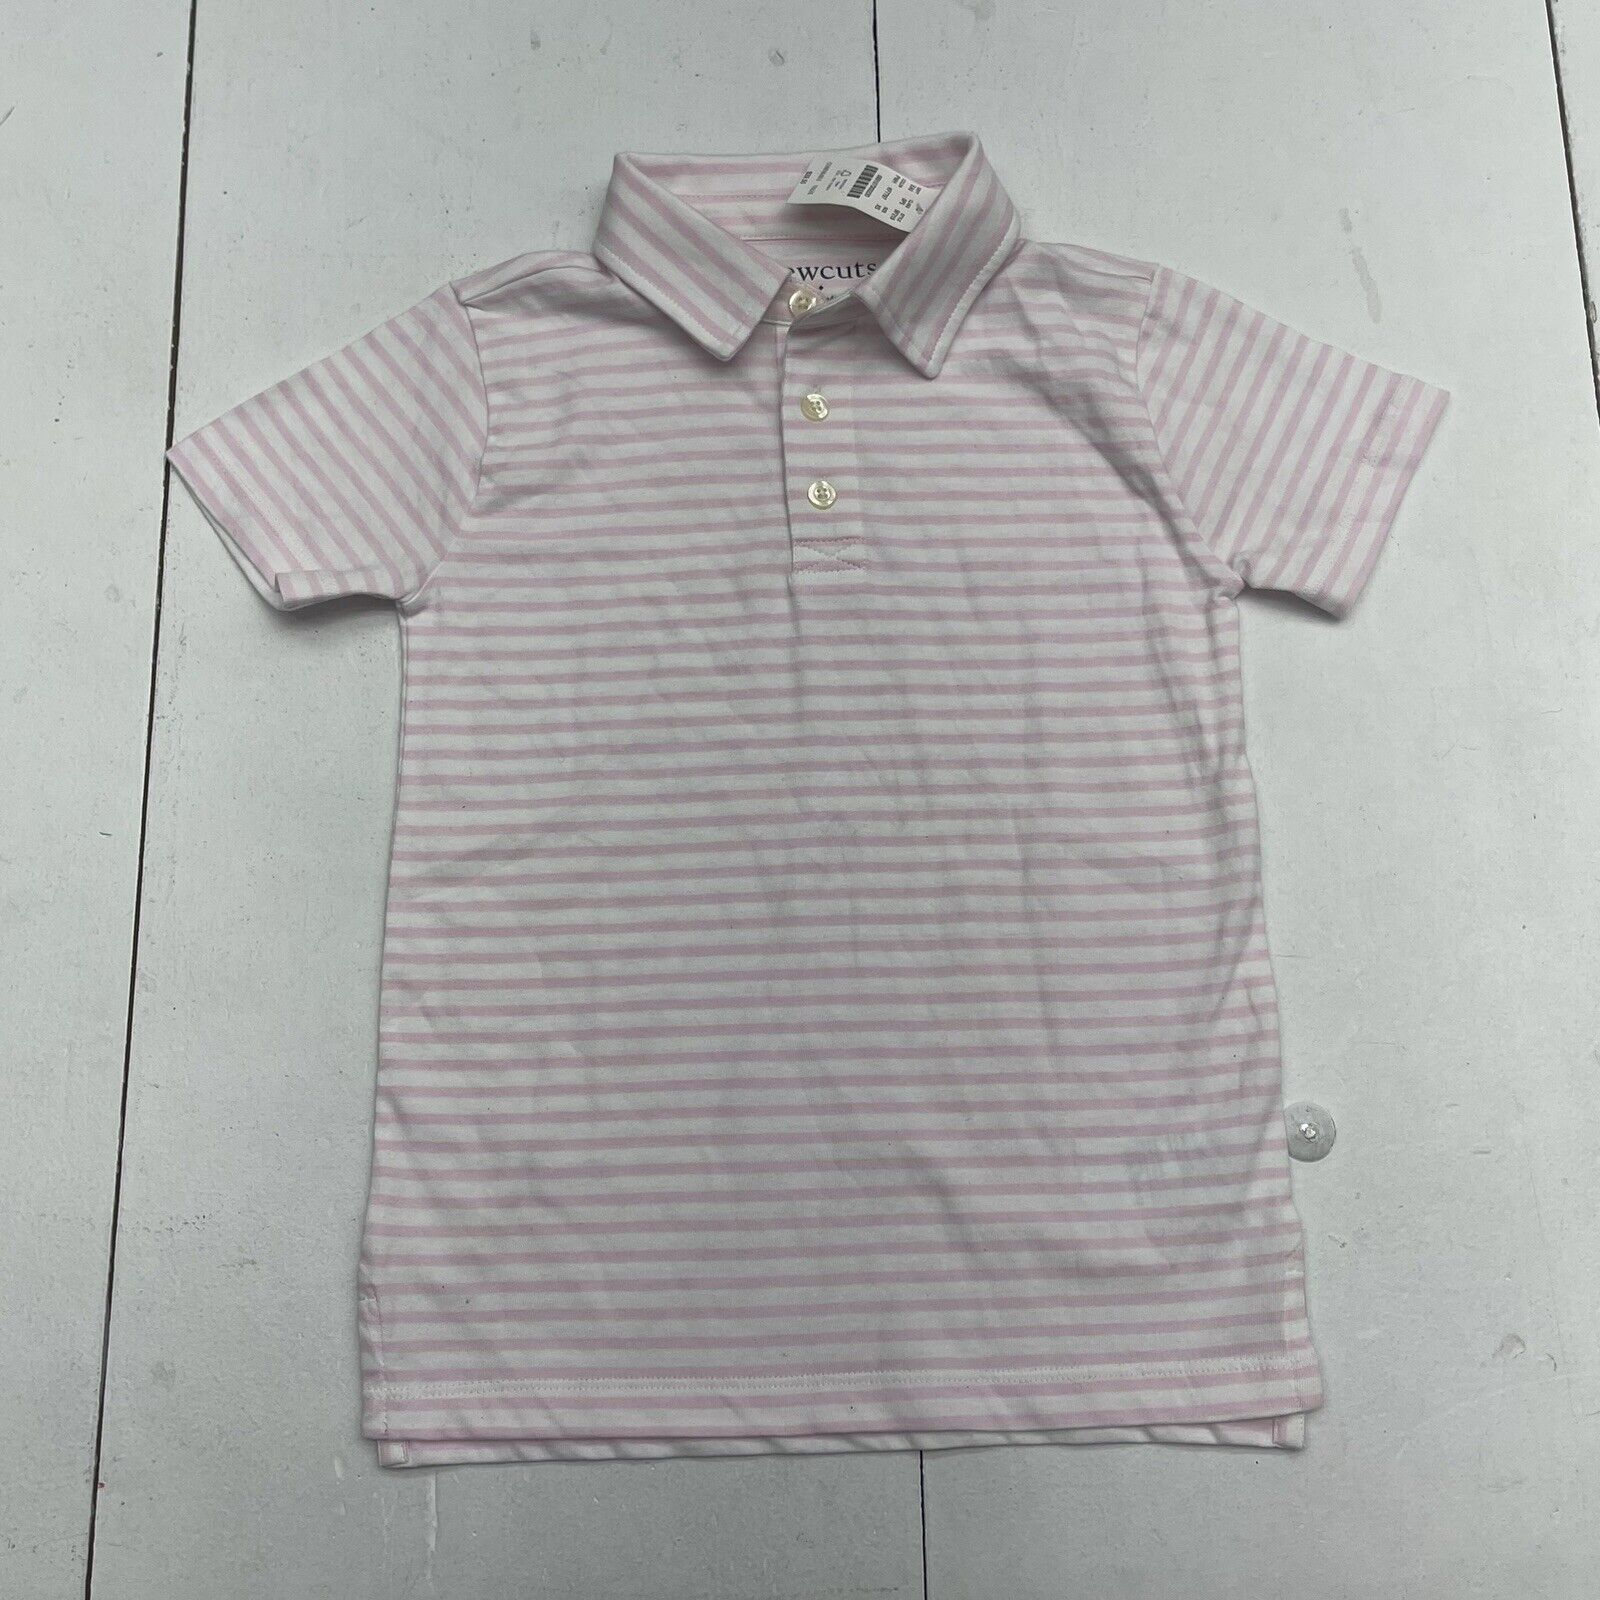 Crewcuts Pink Cotton Striped Short Sleeve Polo Youth Boys Size XS